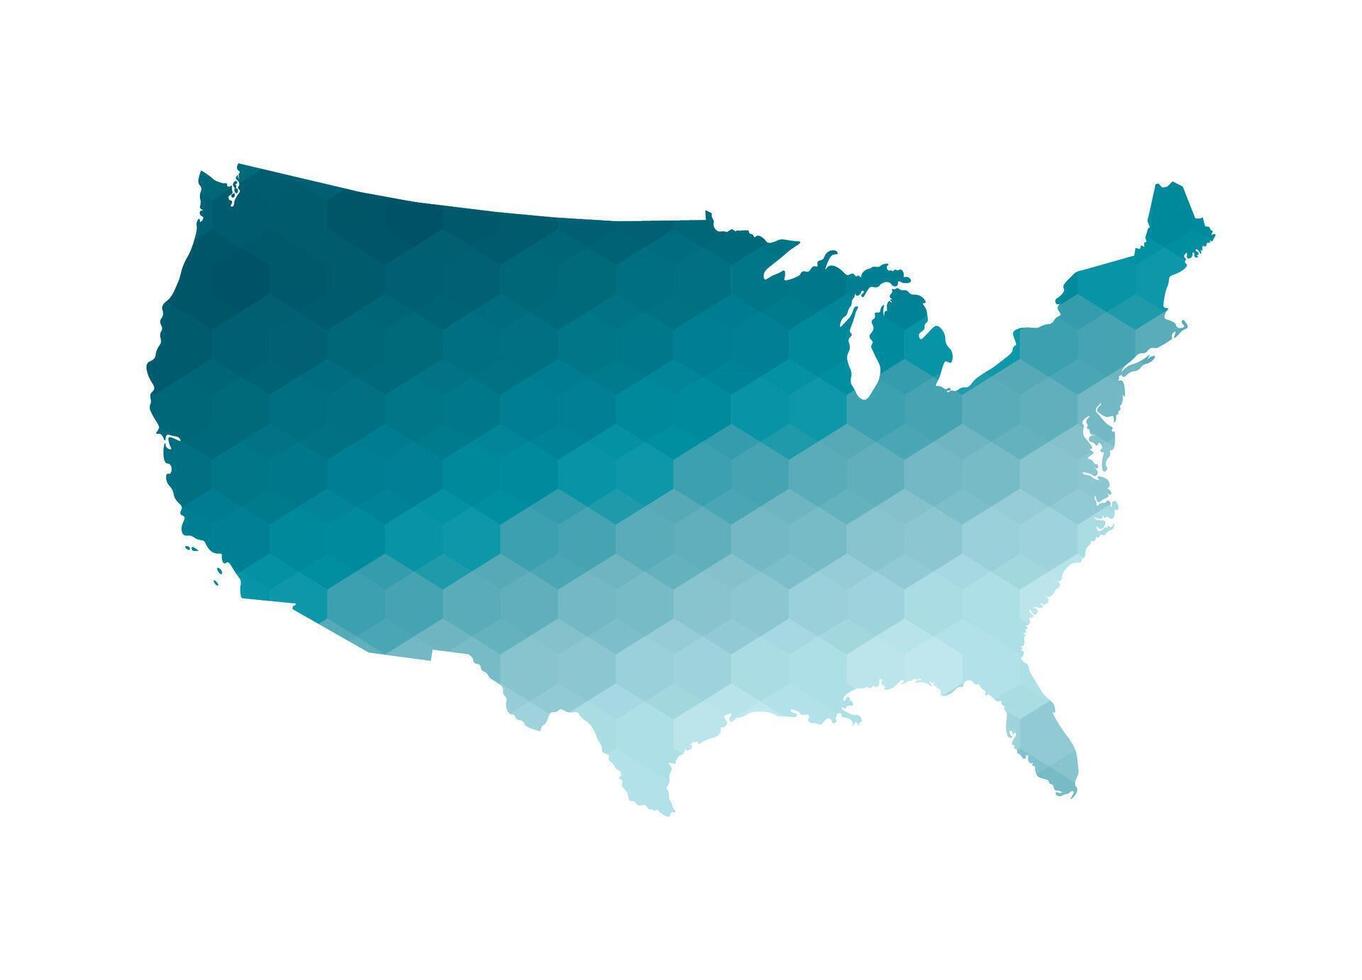 Vector isolated illustration icon with simplified blue silhouette of USA map. Polygonal geometric style. White background.